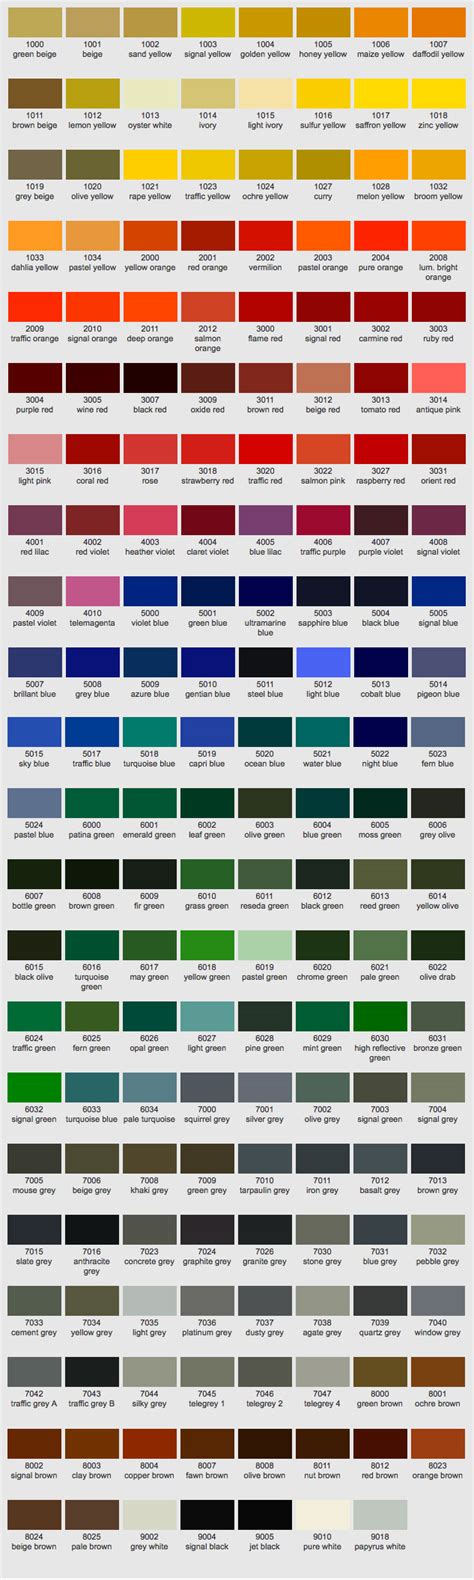 Ral Chart Ideas Ral Colour Chart Ral Colours Ral Color Chart Porn The